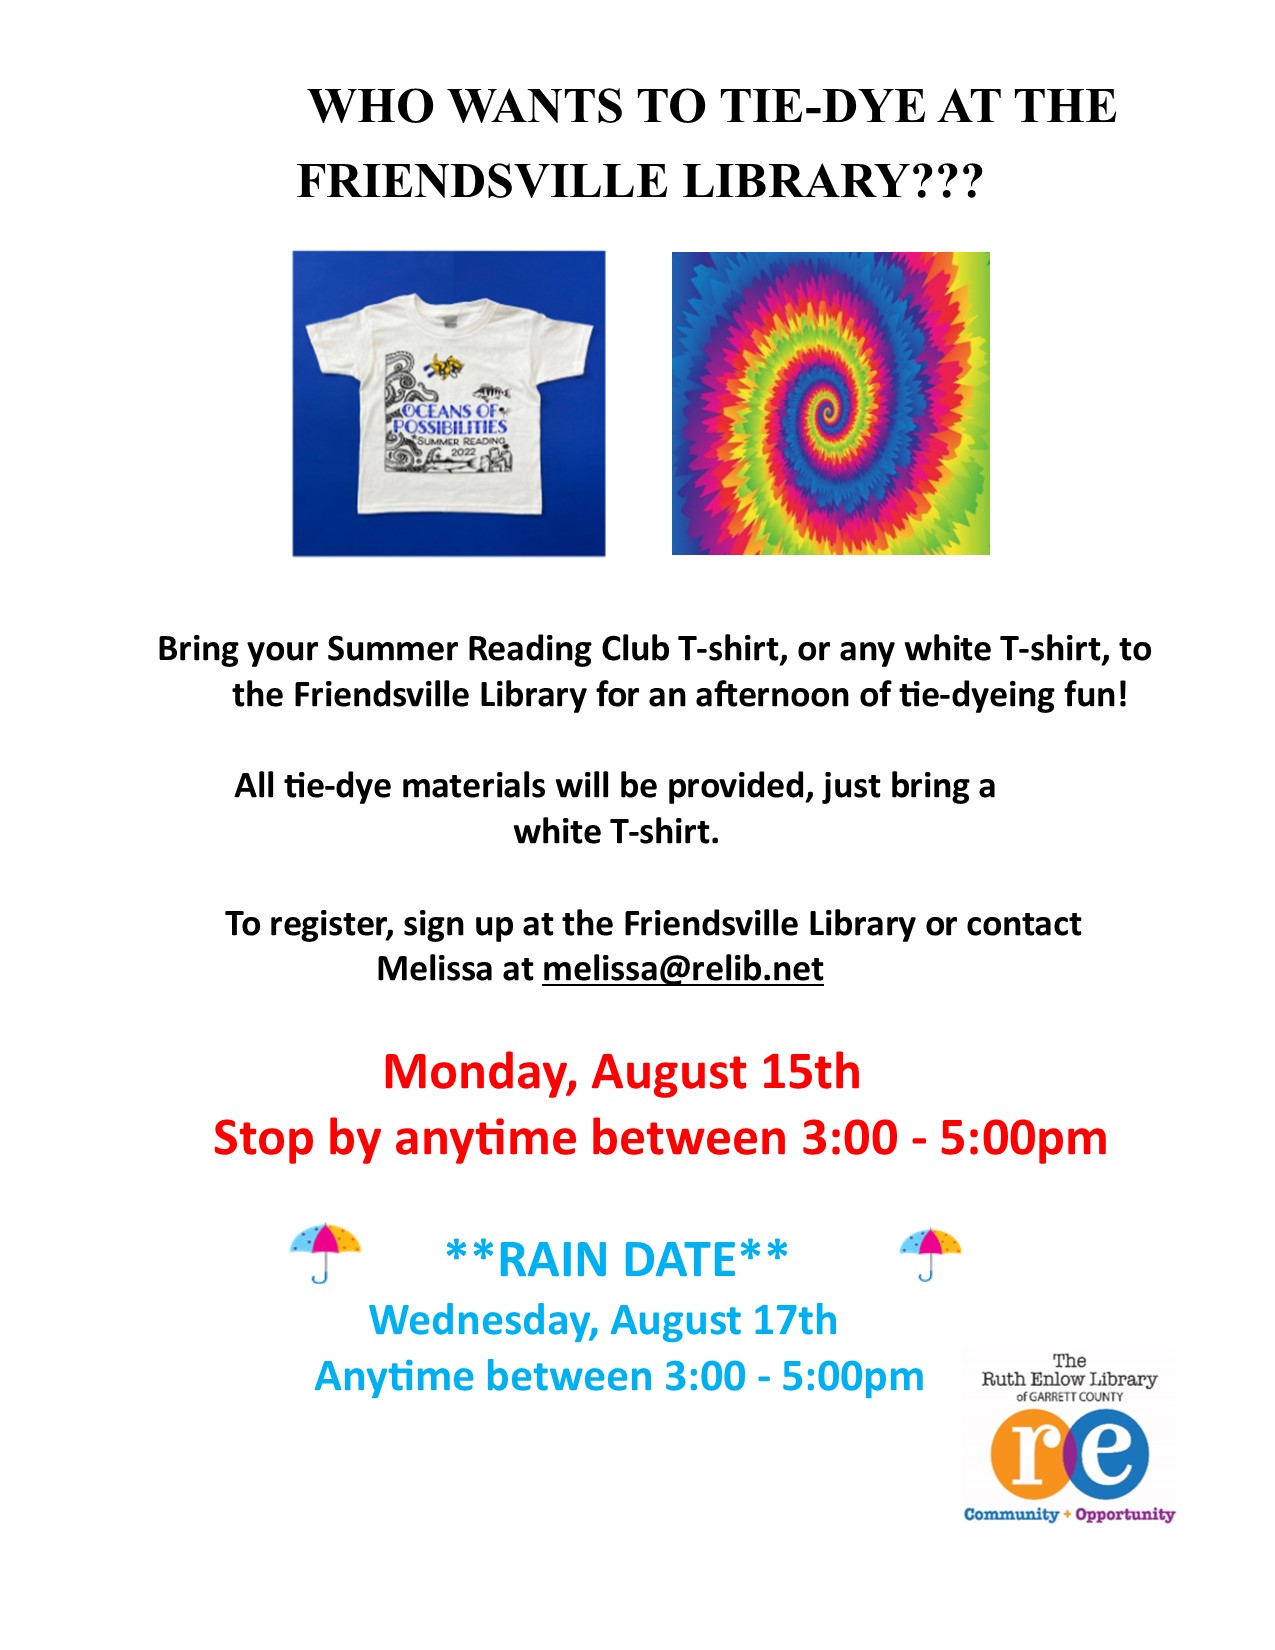 Details of Tie Dyeing event at the Friendsville Library 